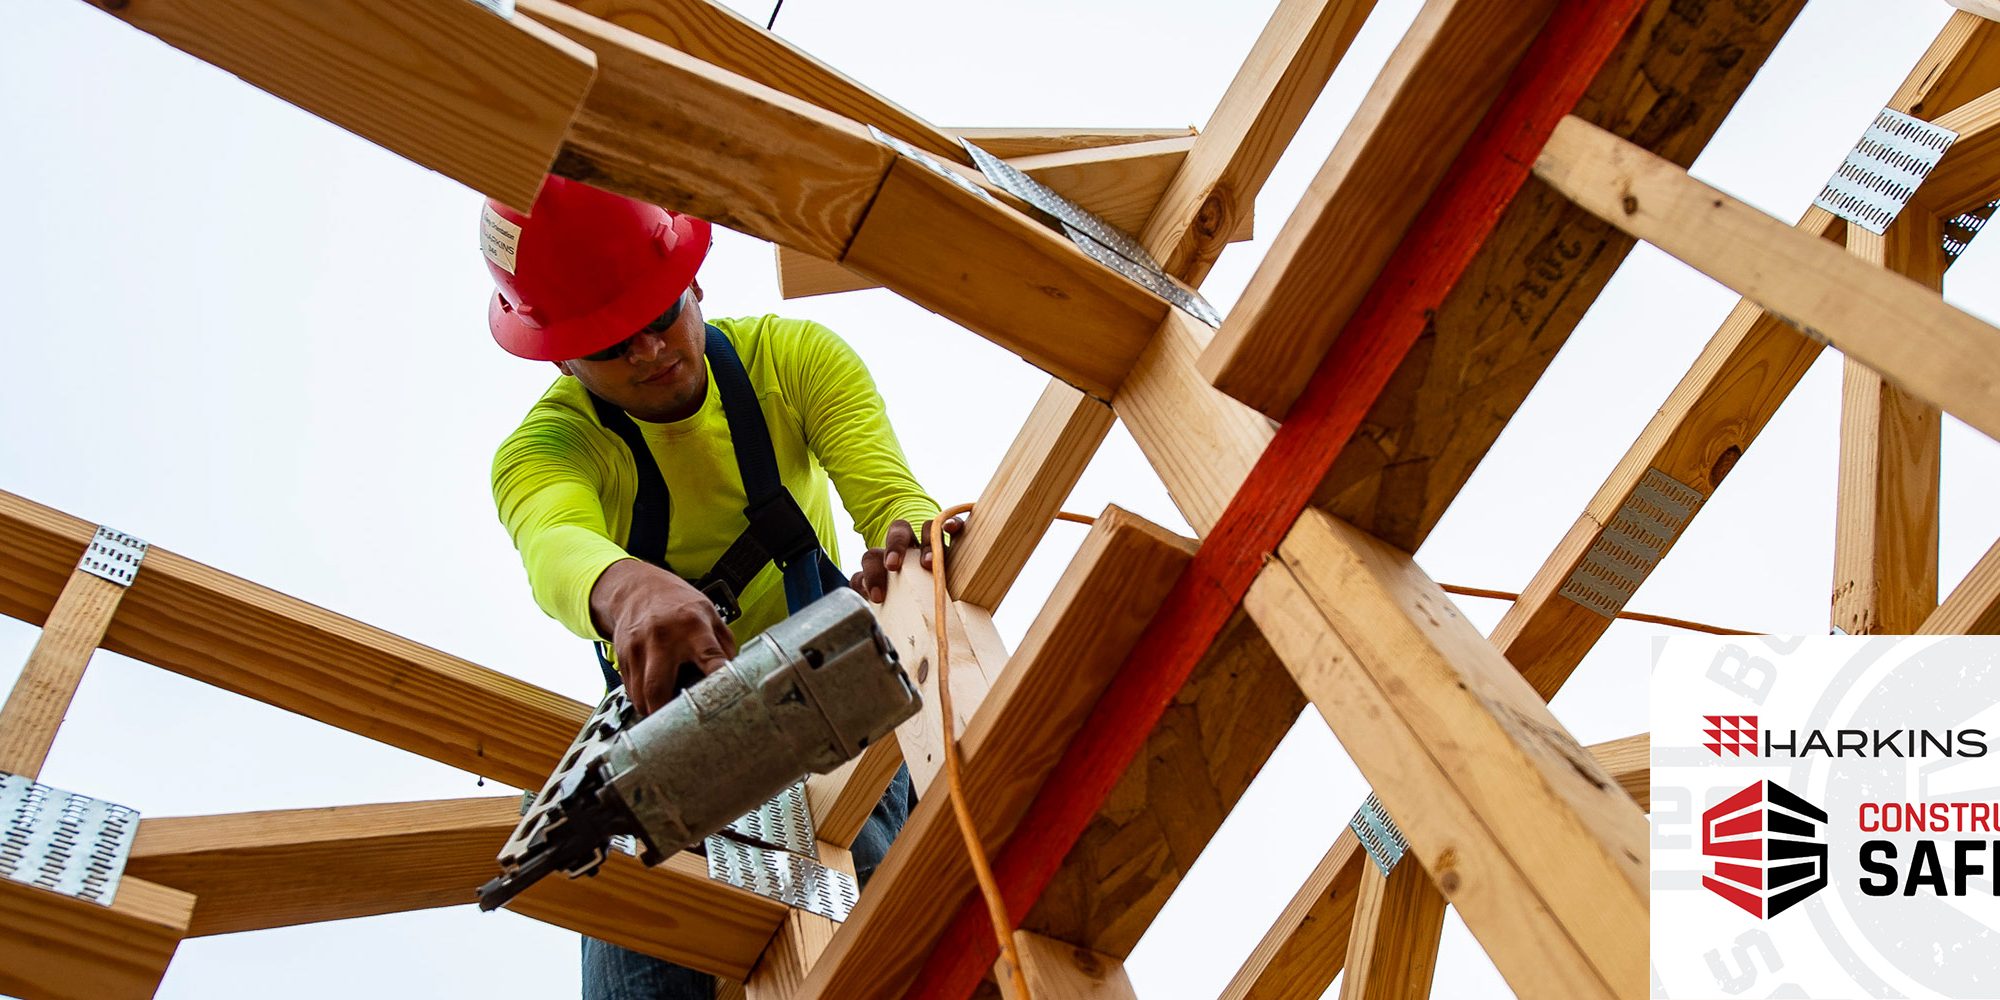 Construction Safety Week 2020: Taking Steps for a Safer Tomorrow